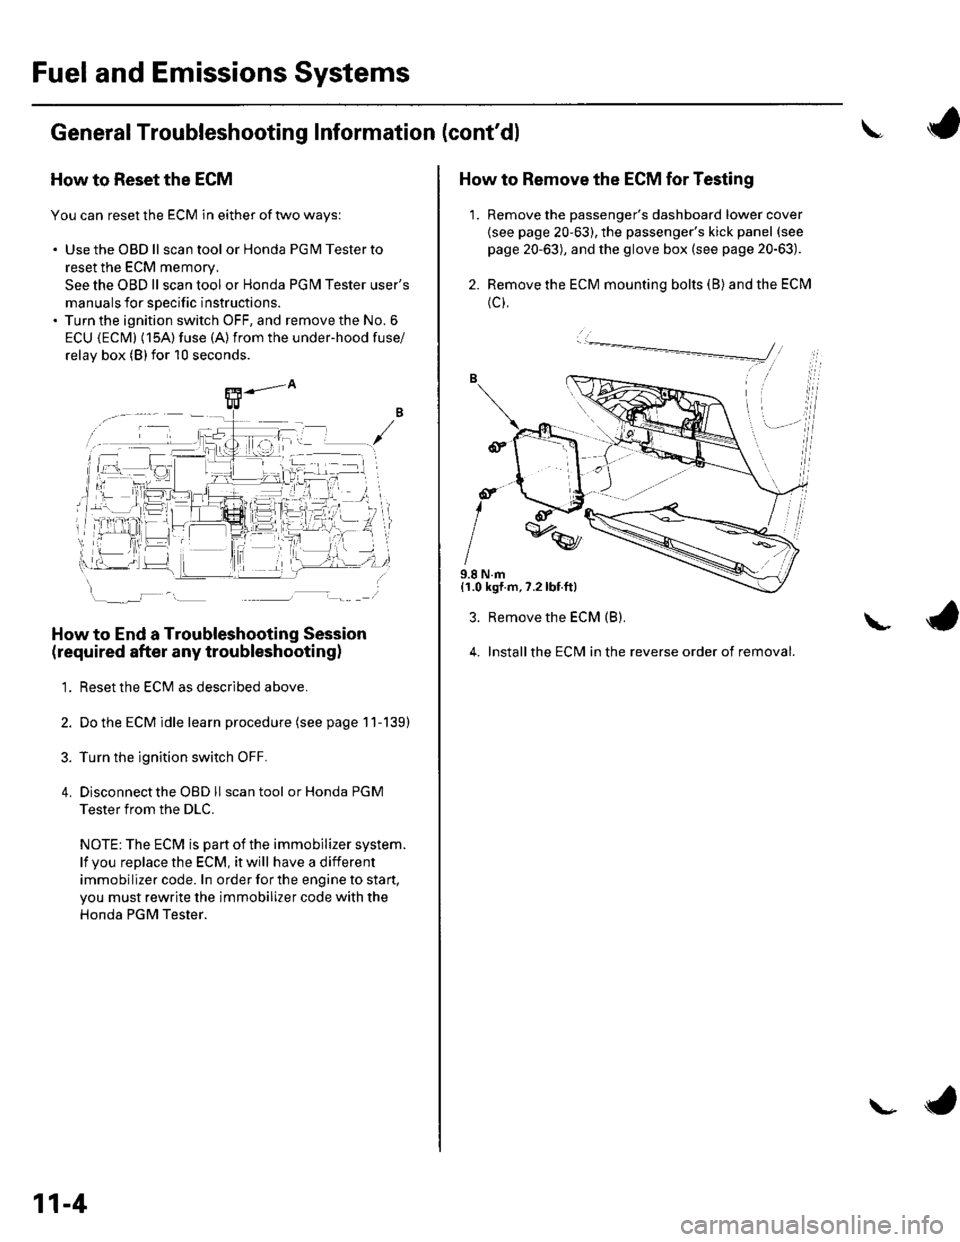 HONDA CIVIC 2002 7.G Workshop Manual Fuel and Emissions Systems
General Troubleshooting Information (contdl
How to Reset the ECM
You can reset the ECM in either of two ways:
. Use the OBD ll scantool or Honda PGMTesterto
reset the ECM m